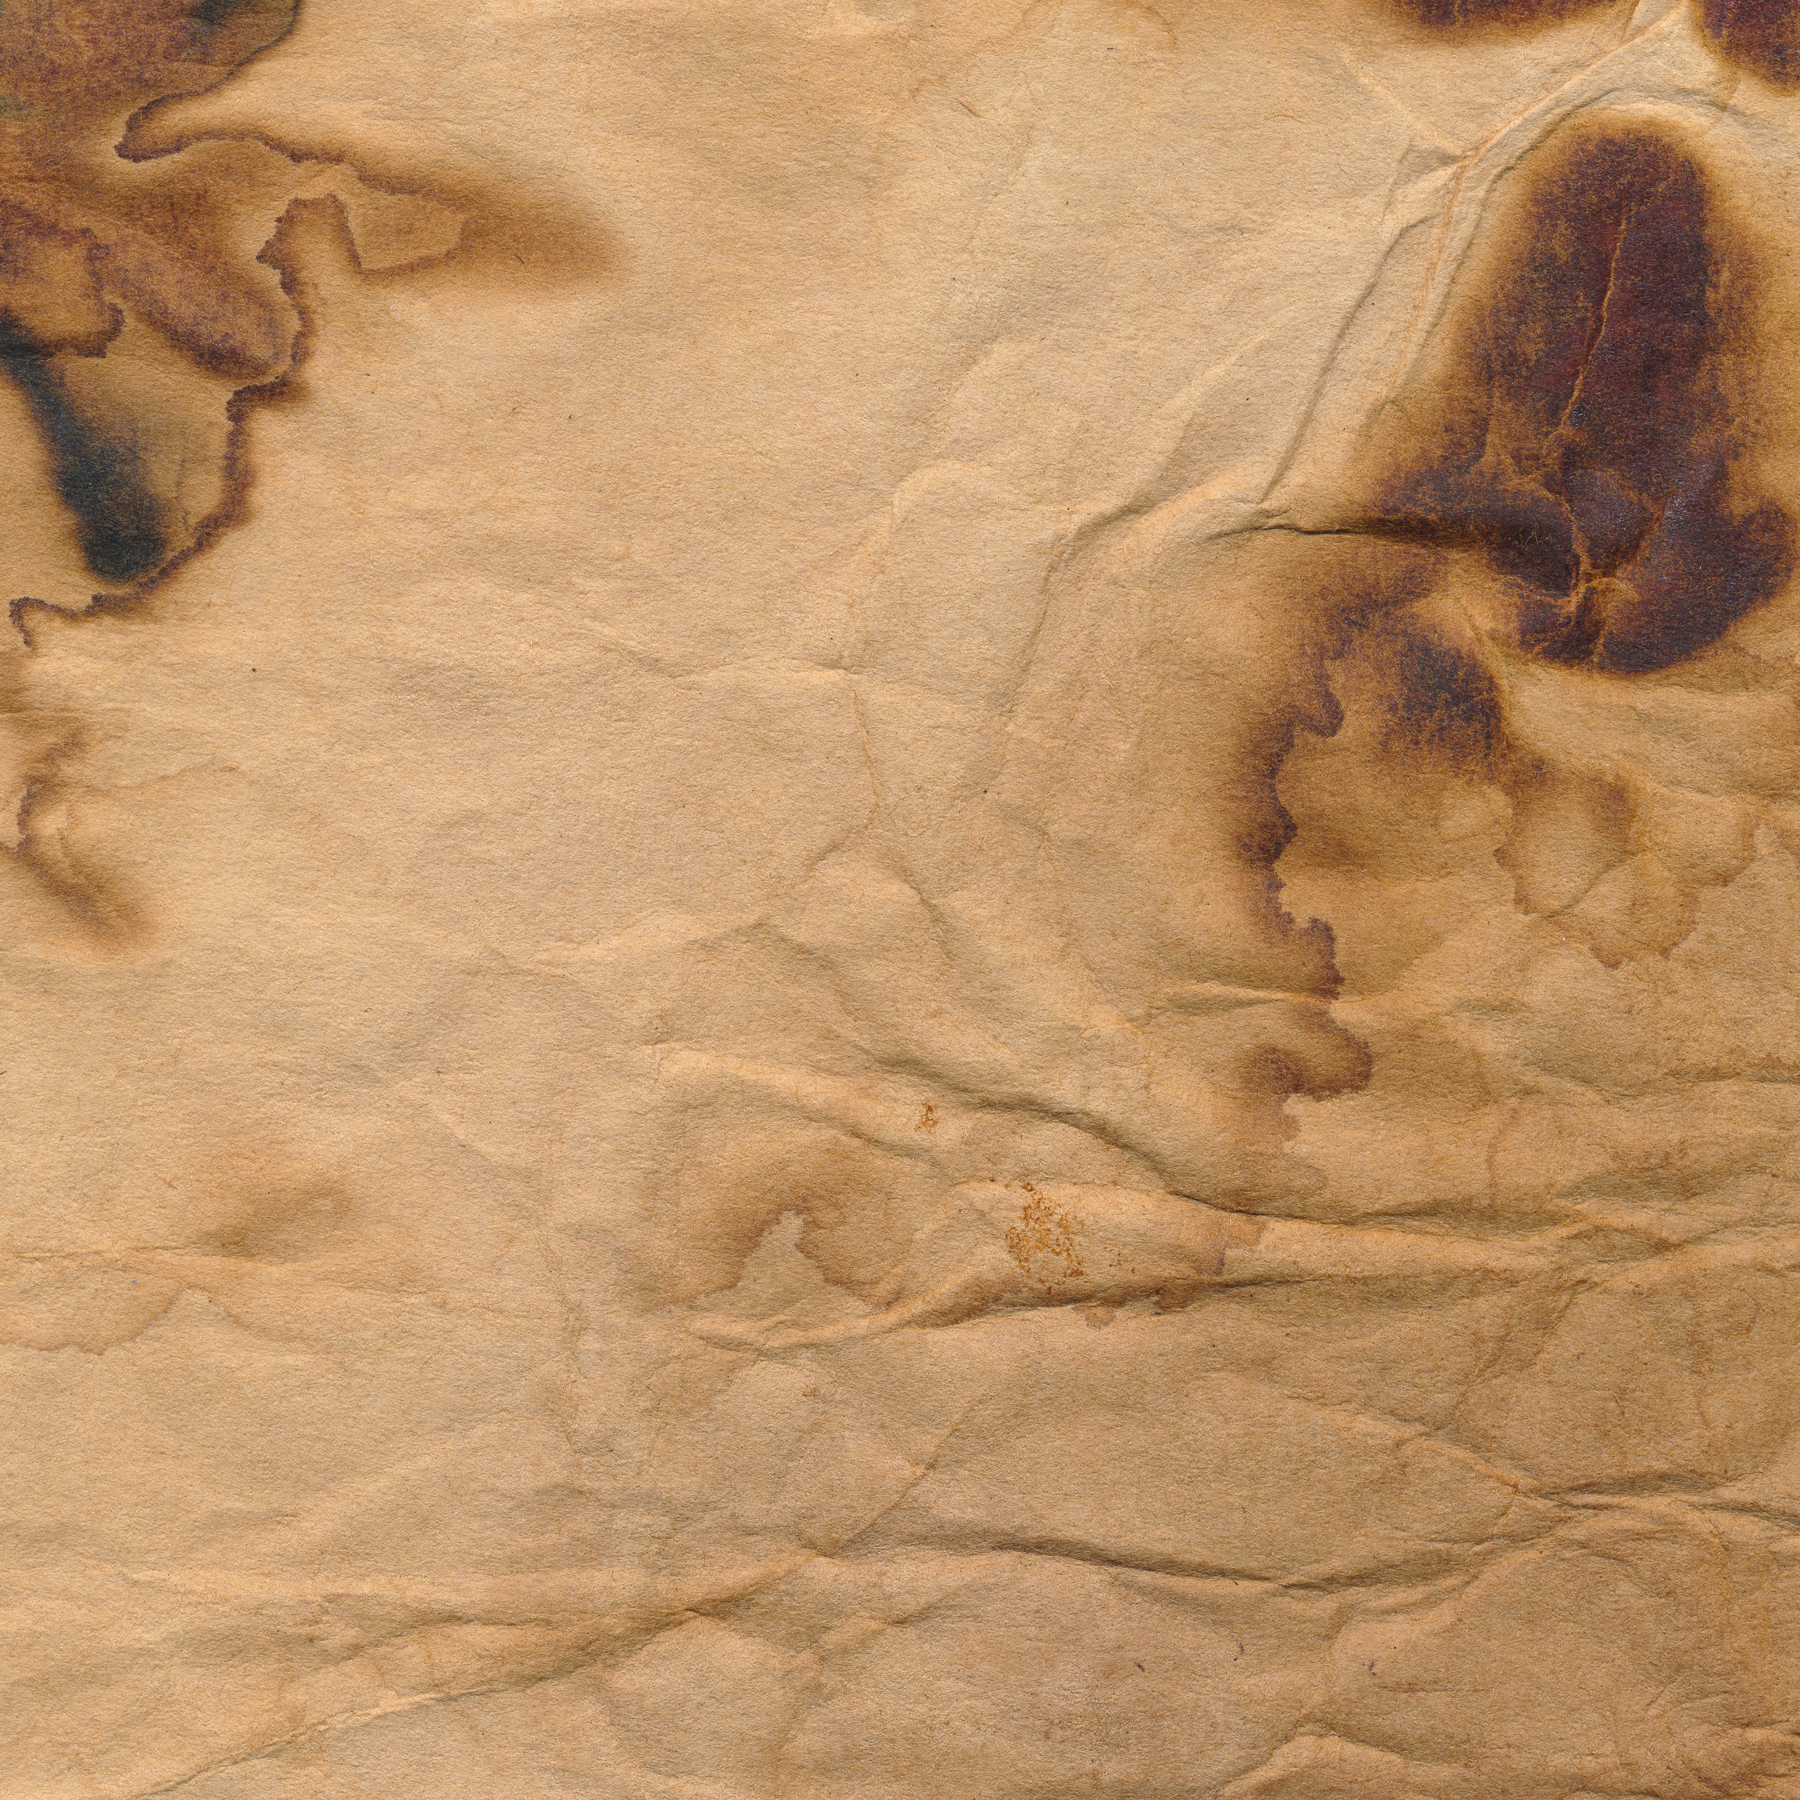 Coffee stained paper texture photo